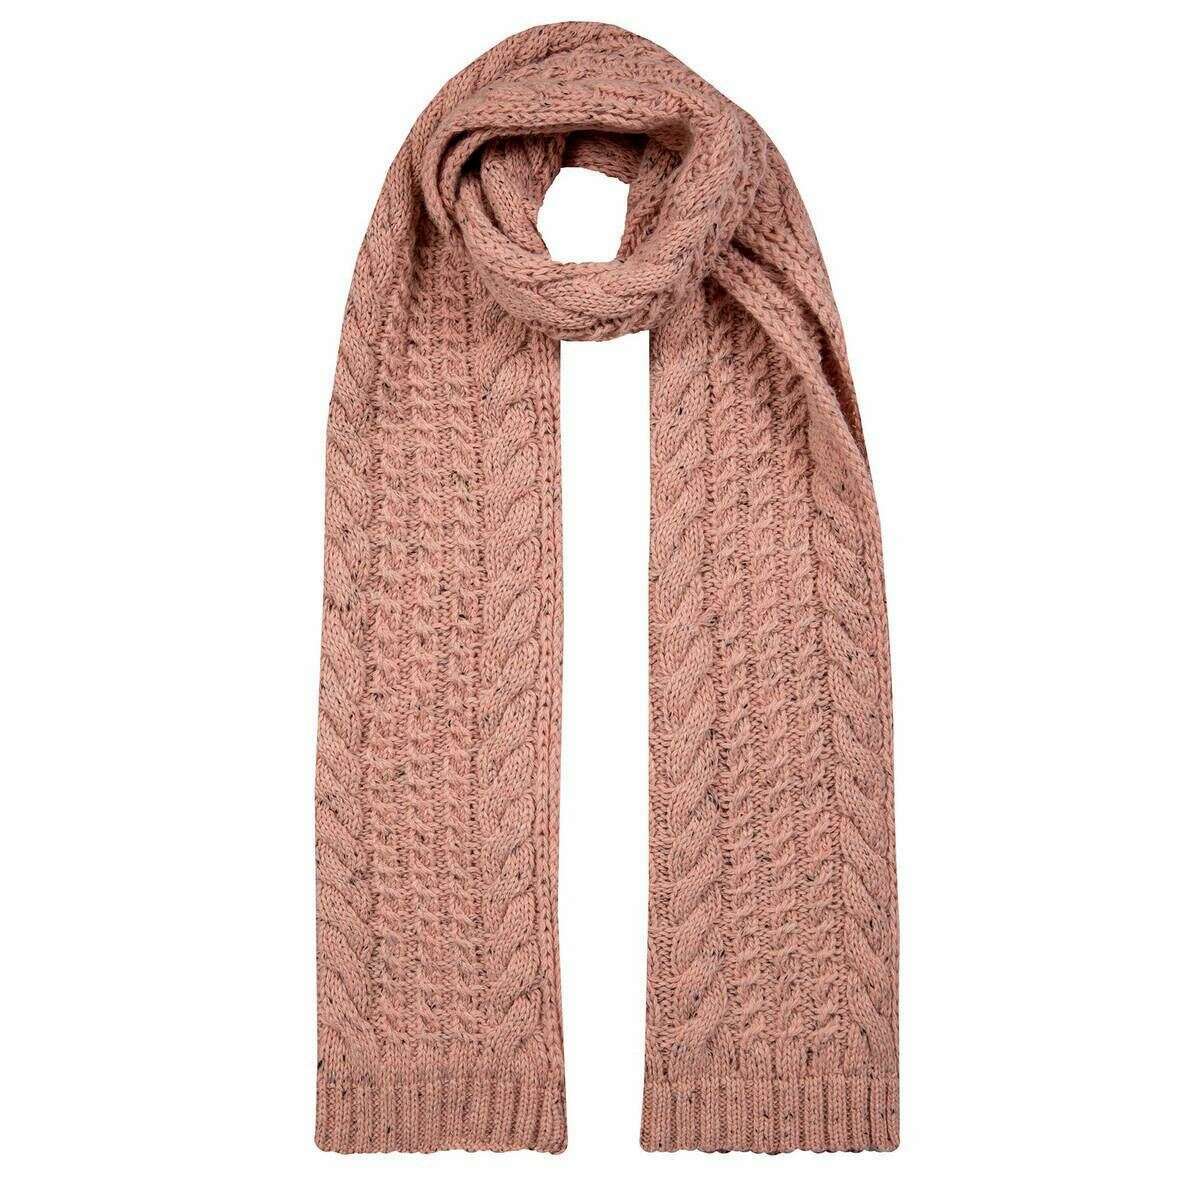 Dents Cable Knit Marl Scarf - Powder Pink